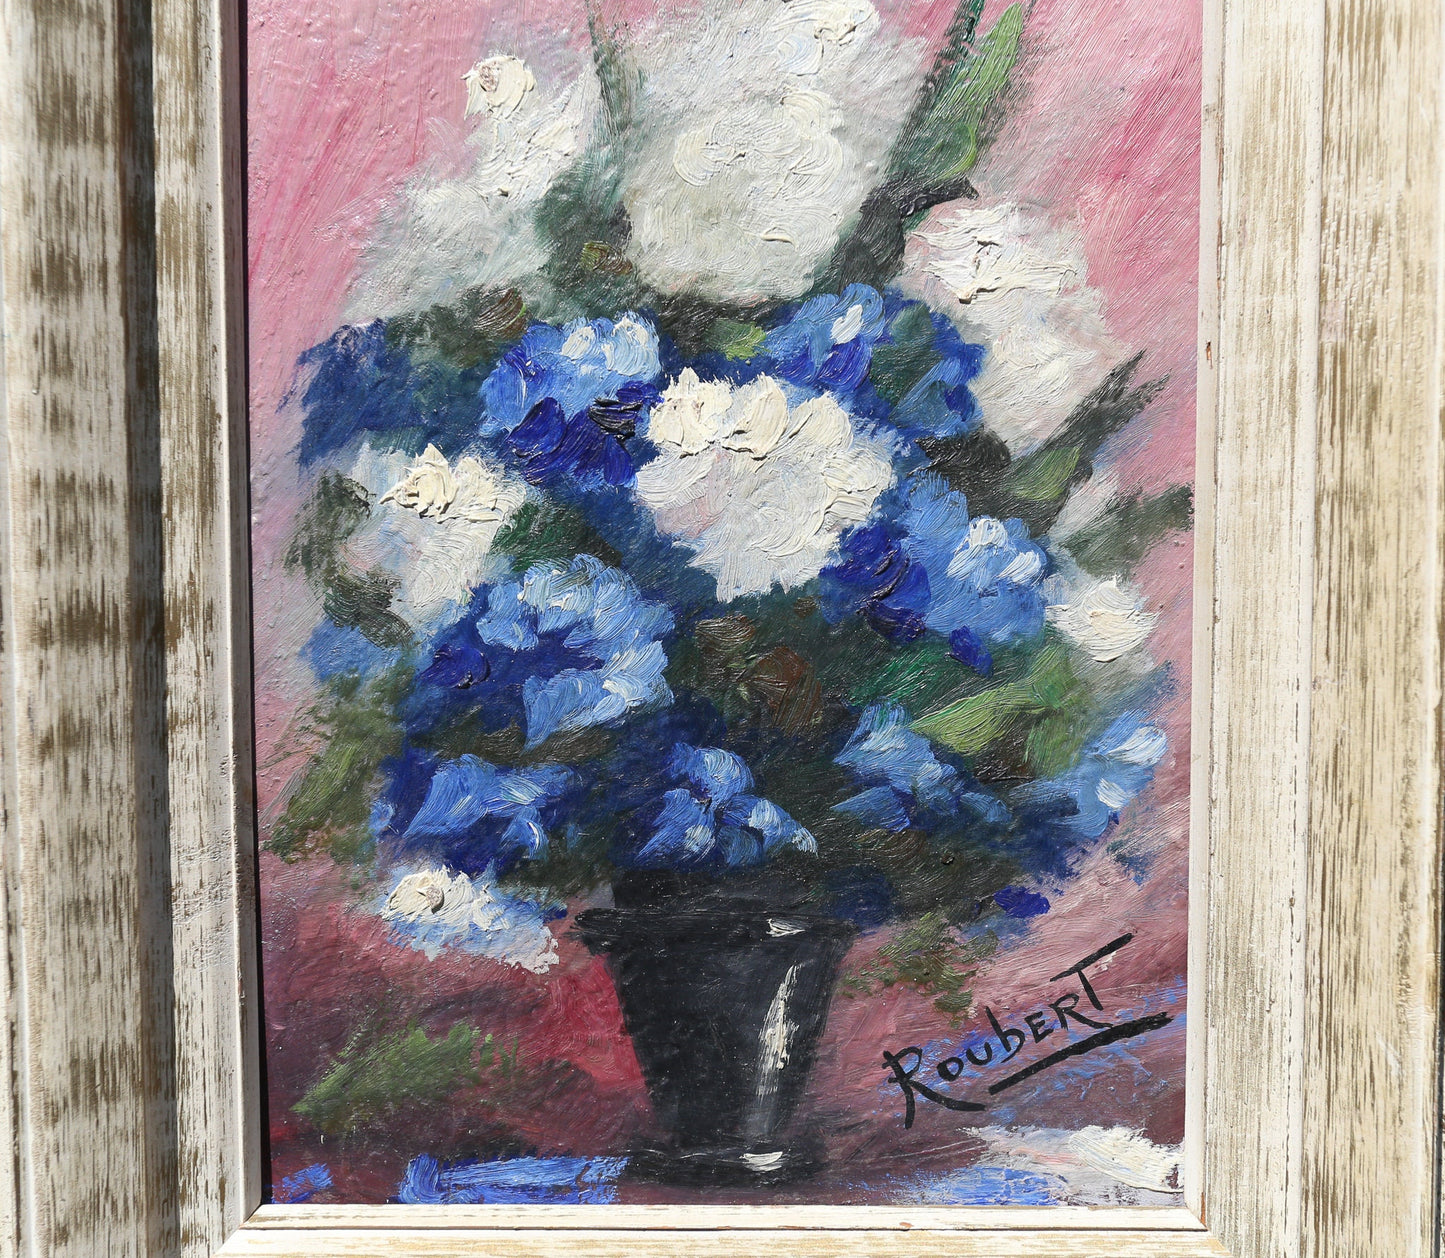 Painting Oil on Board Masonite Hydrangeas in Blue and White Artist Signed Roubert 1950s Period Frame